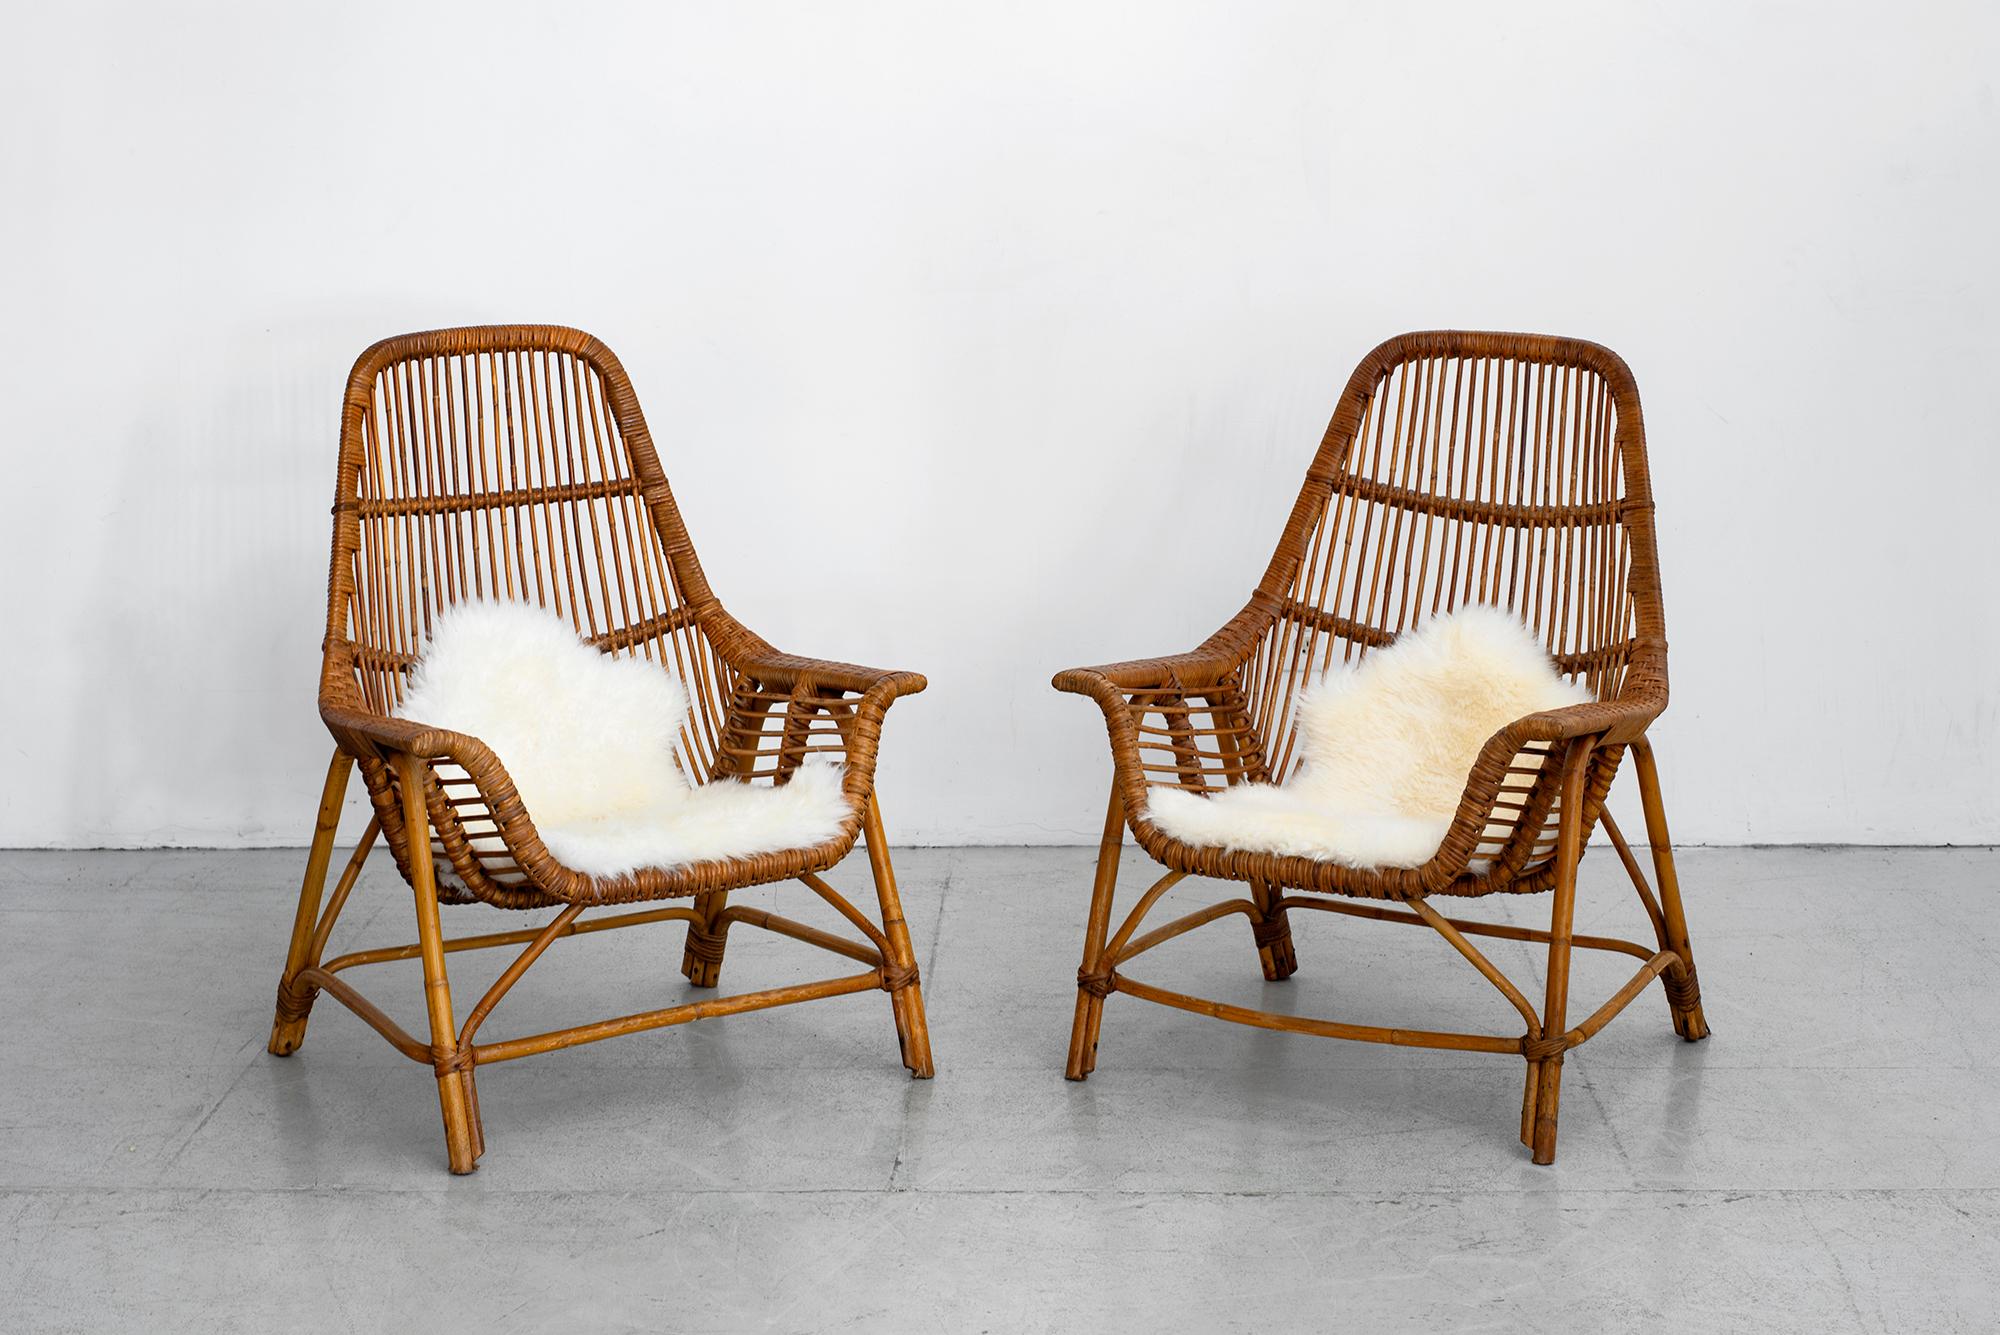 Wonderful pair of rattan chairs by Georges Coslin, France, circa 1956
Sculptural scoop shape.




